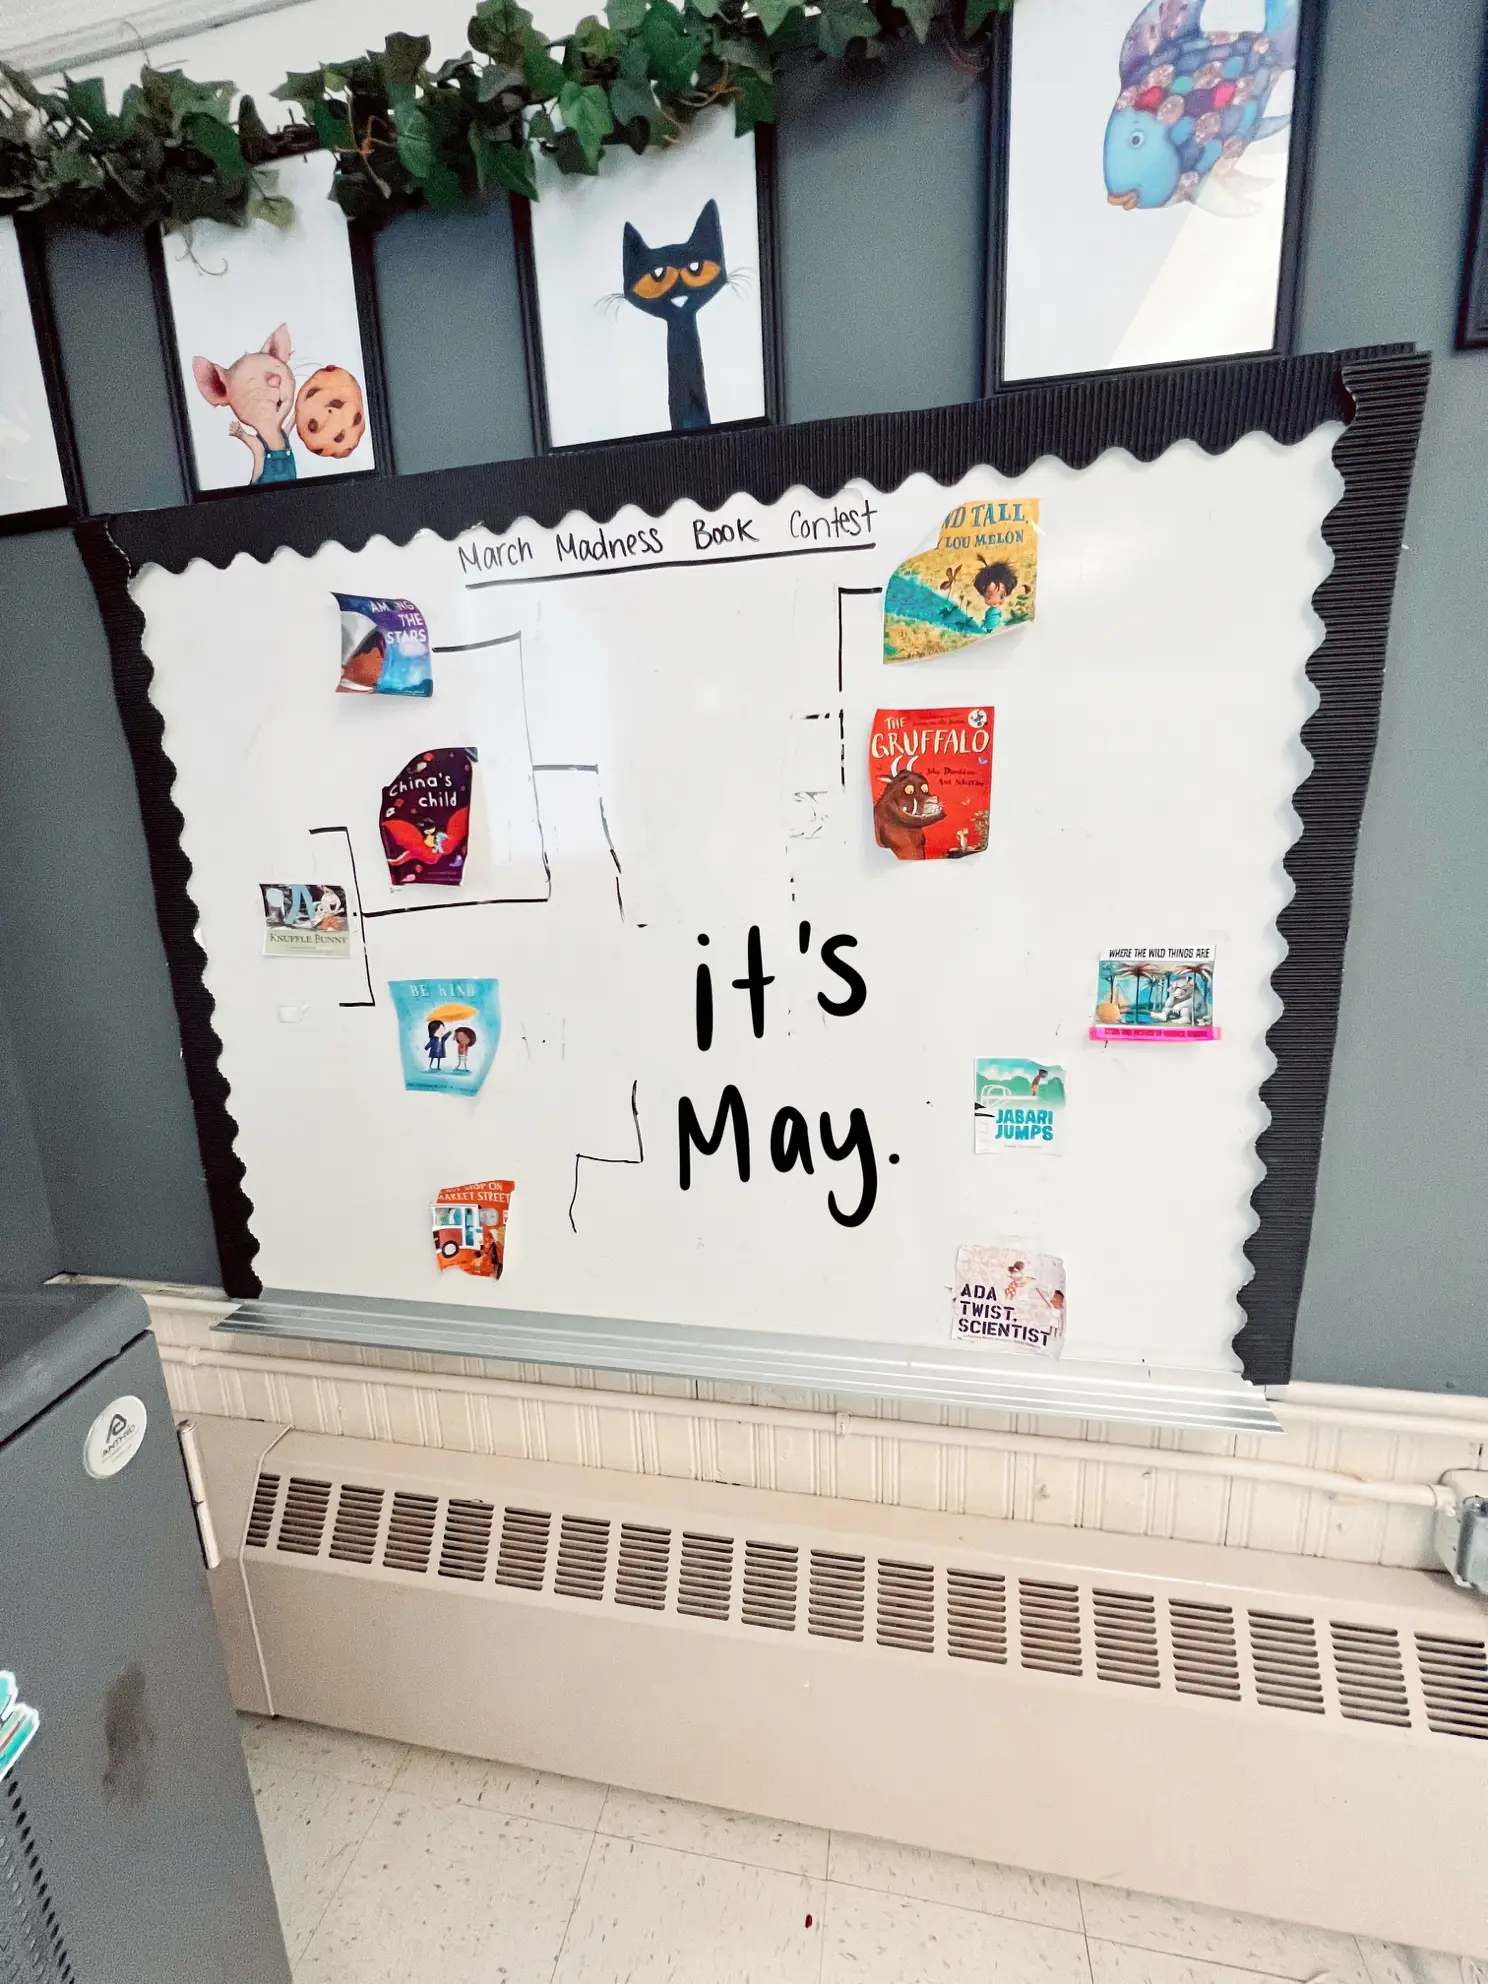  A bulletin board with a calendar on it that says "It's May Where the wild things are".